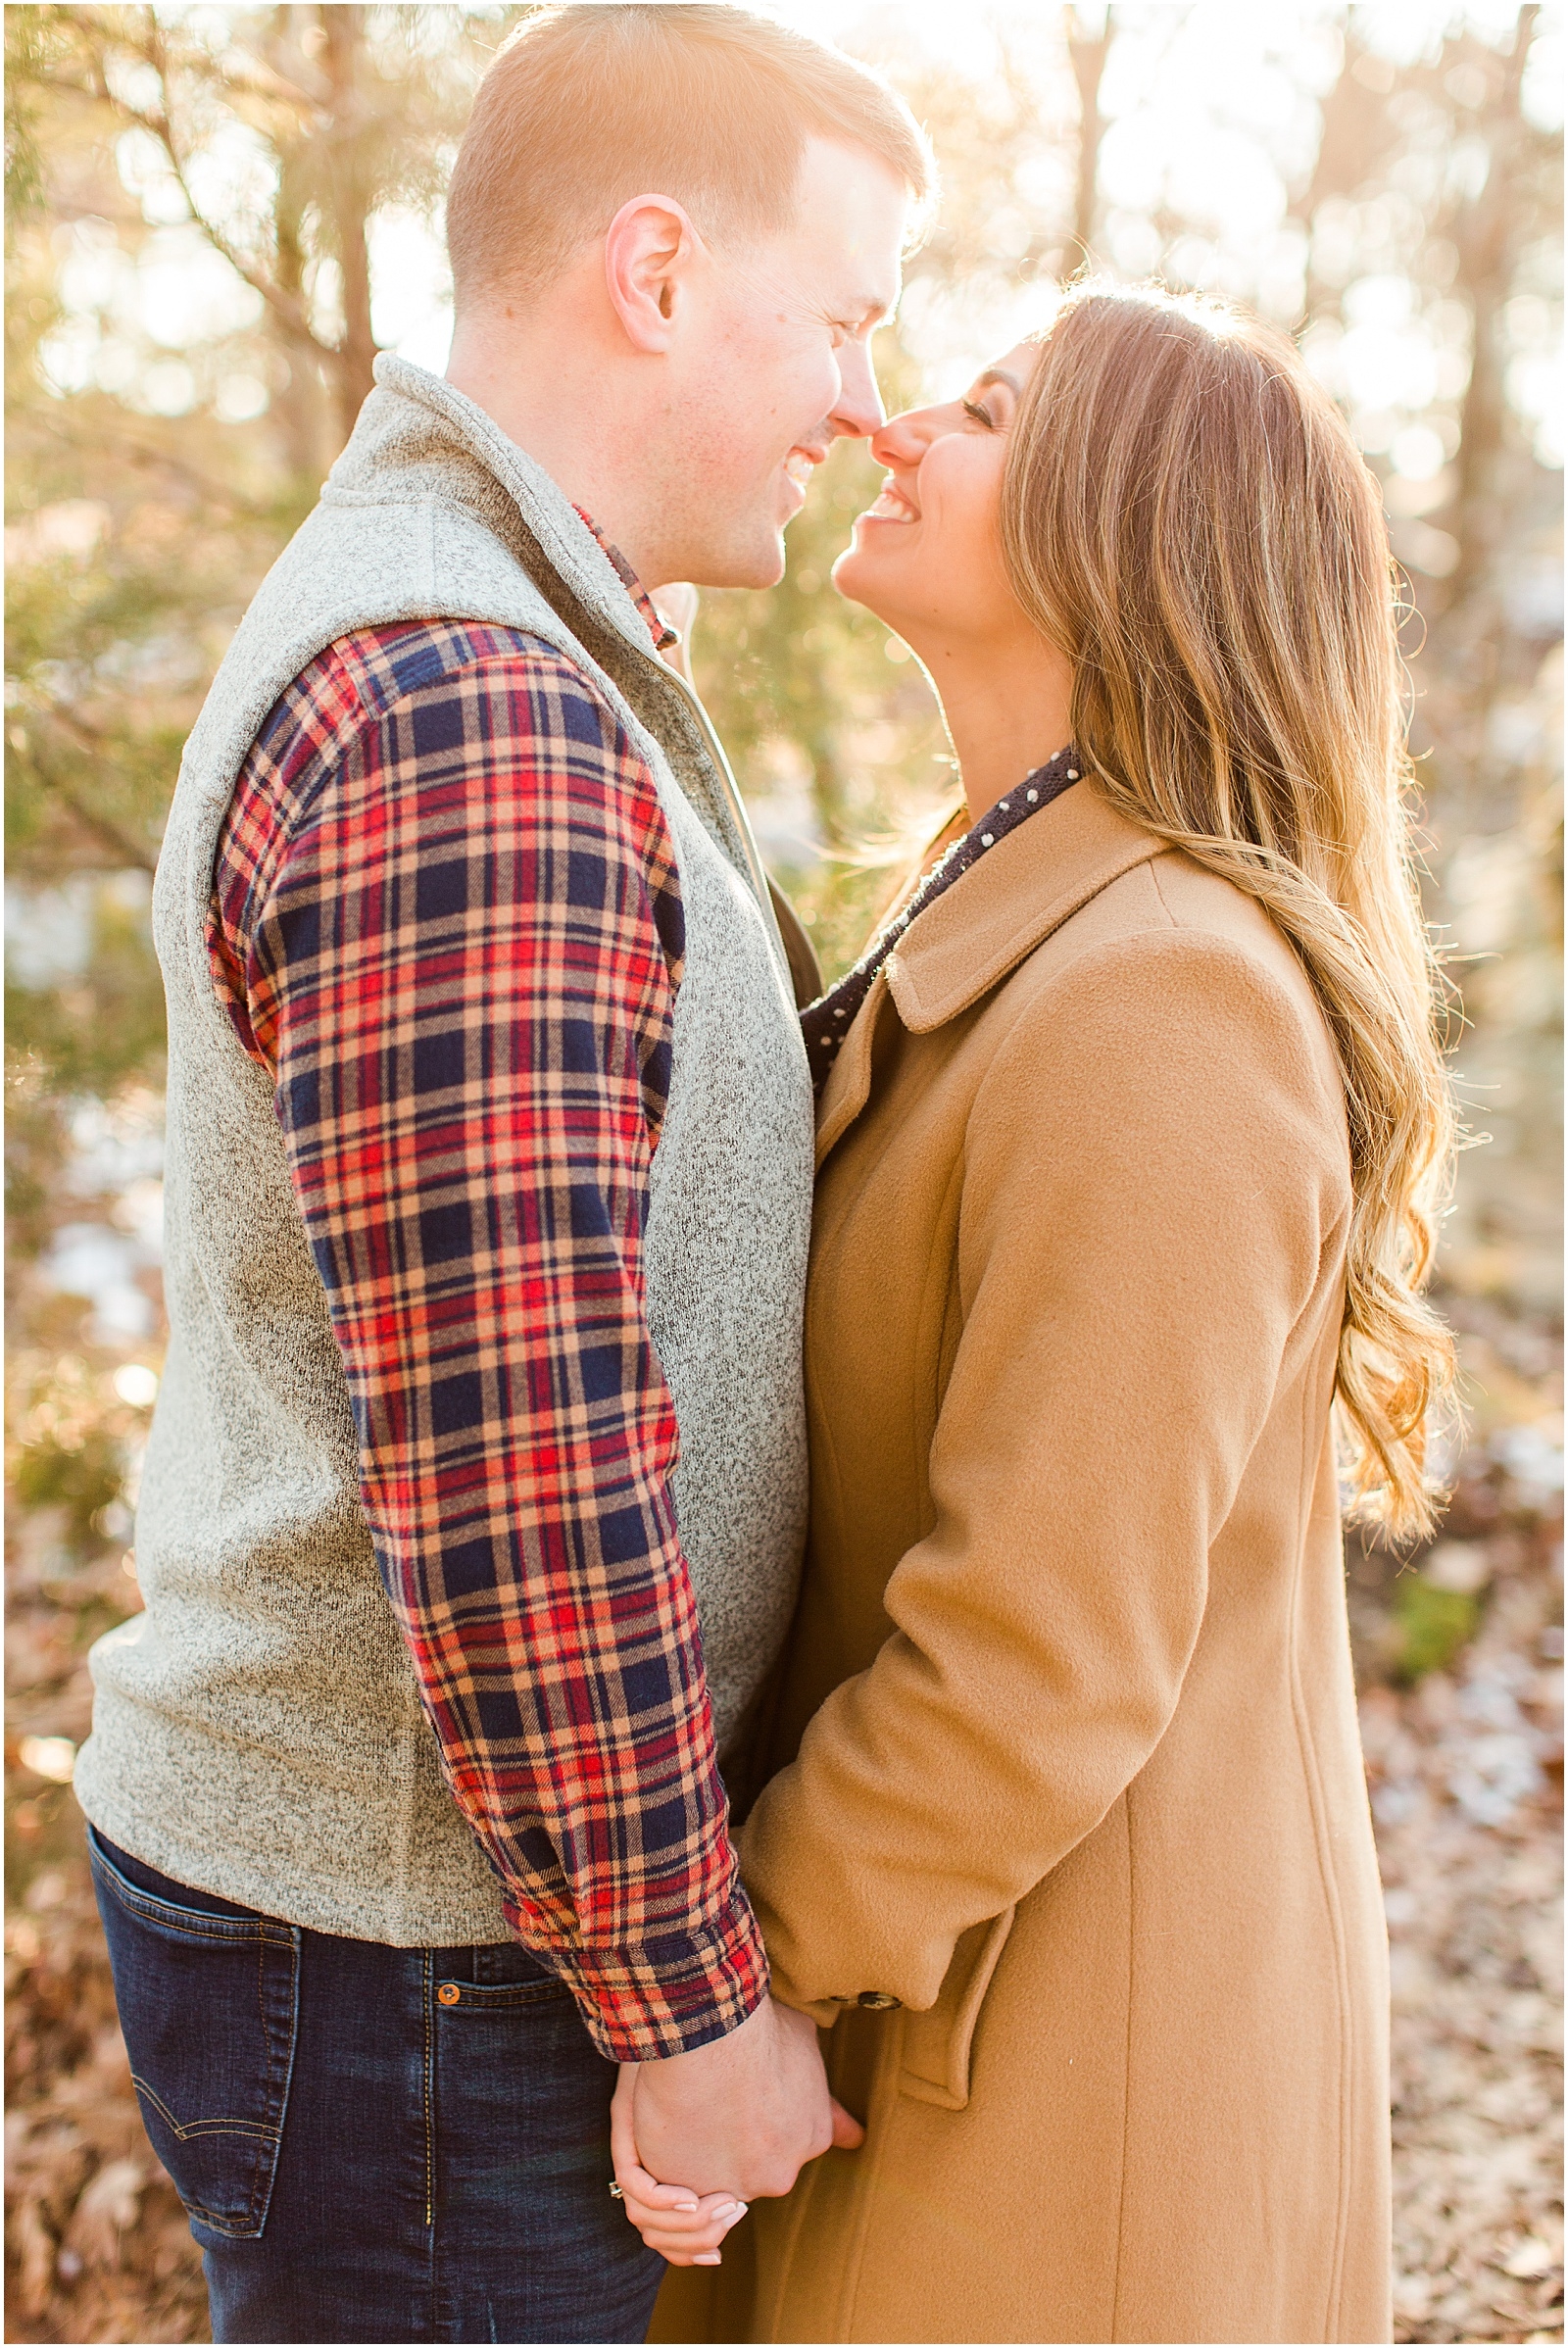 A Sunny Garden of the Gods Engagement Session | Shiloh and Lee | Bret and Brandie Photography028.jpg